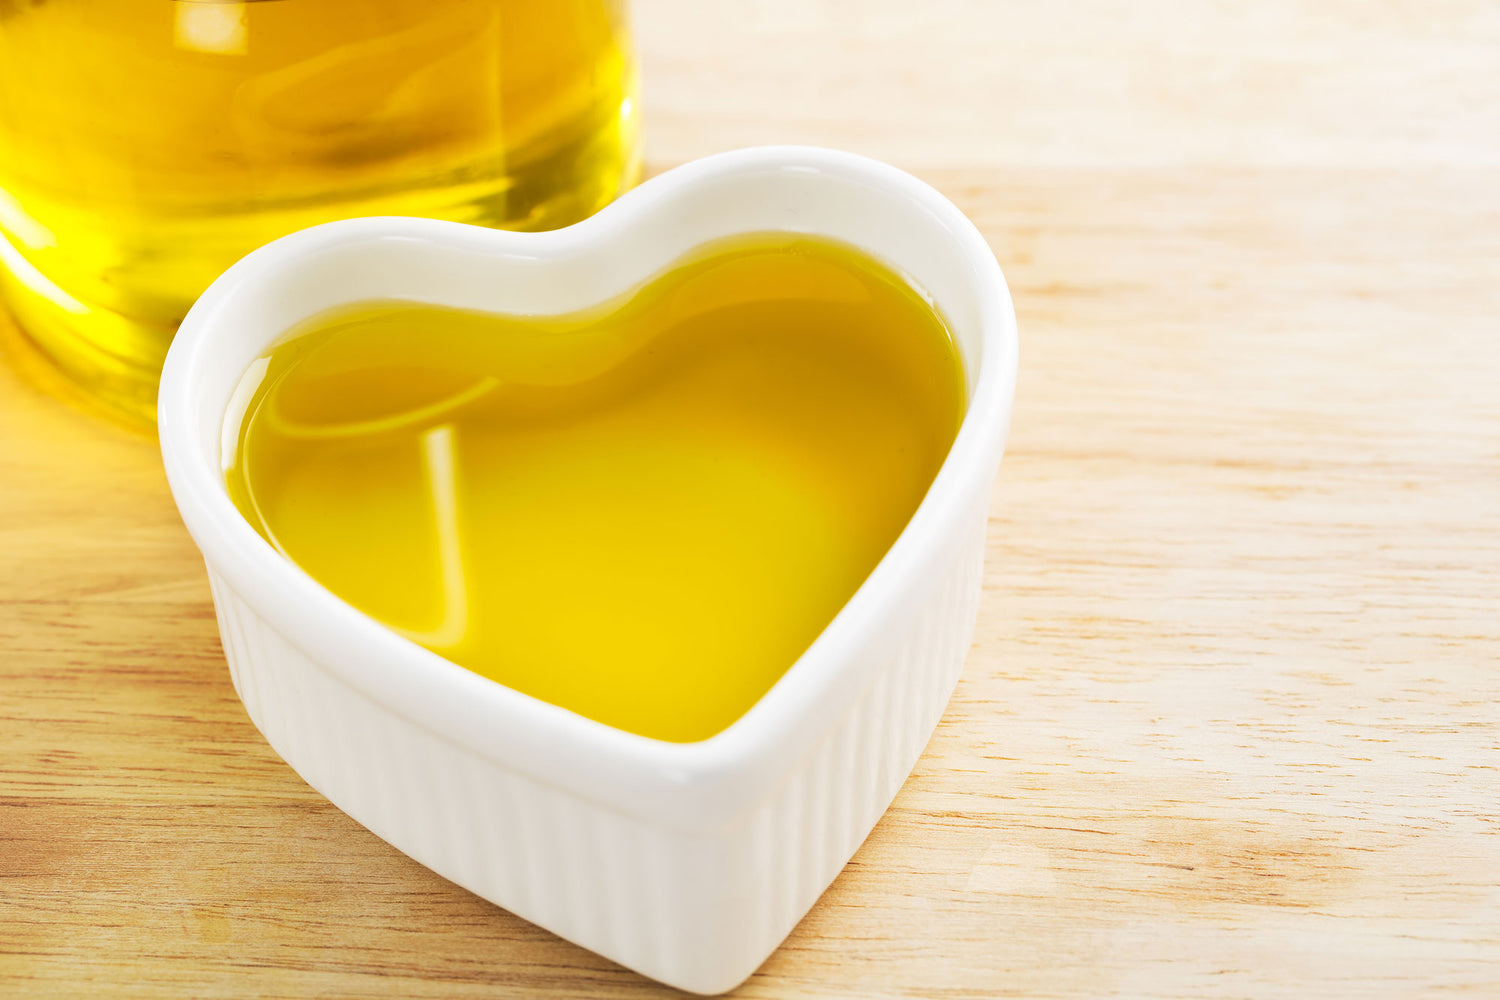 8 Types of Oil For A Healthy Heart